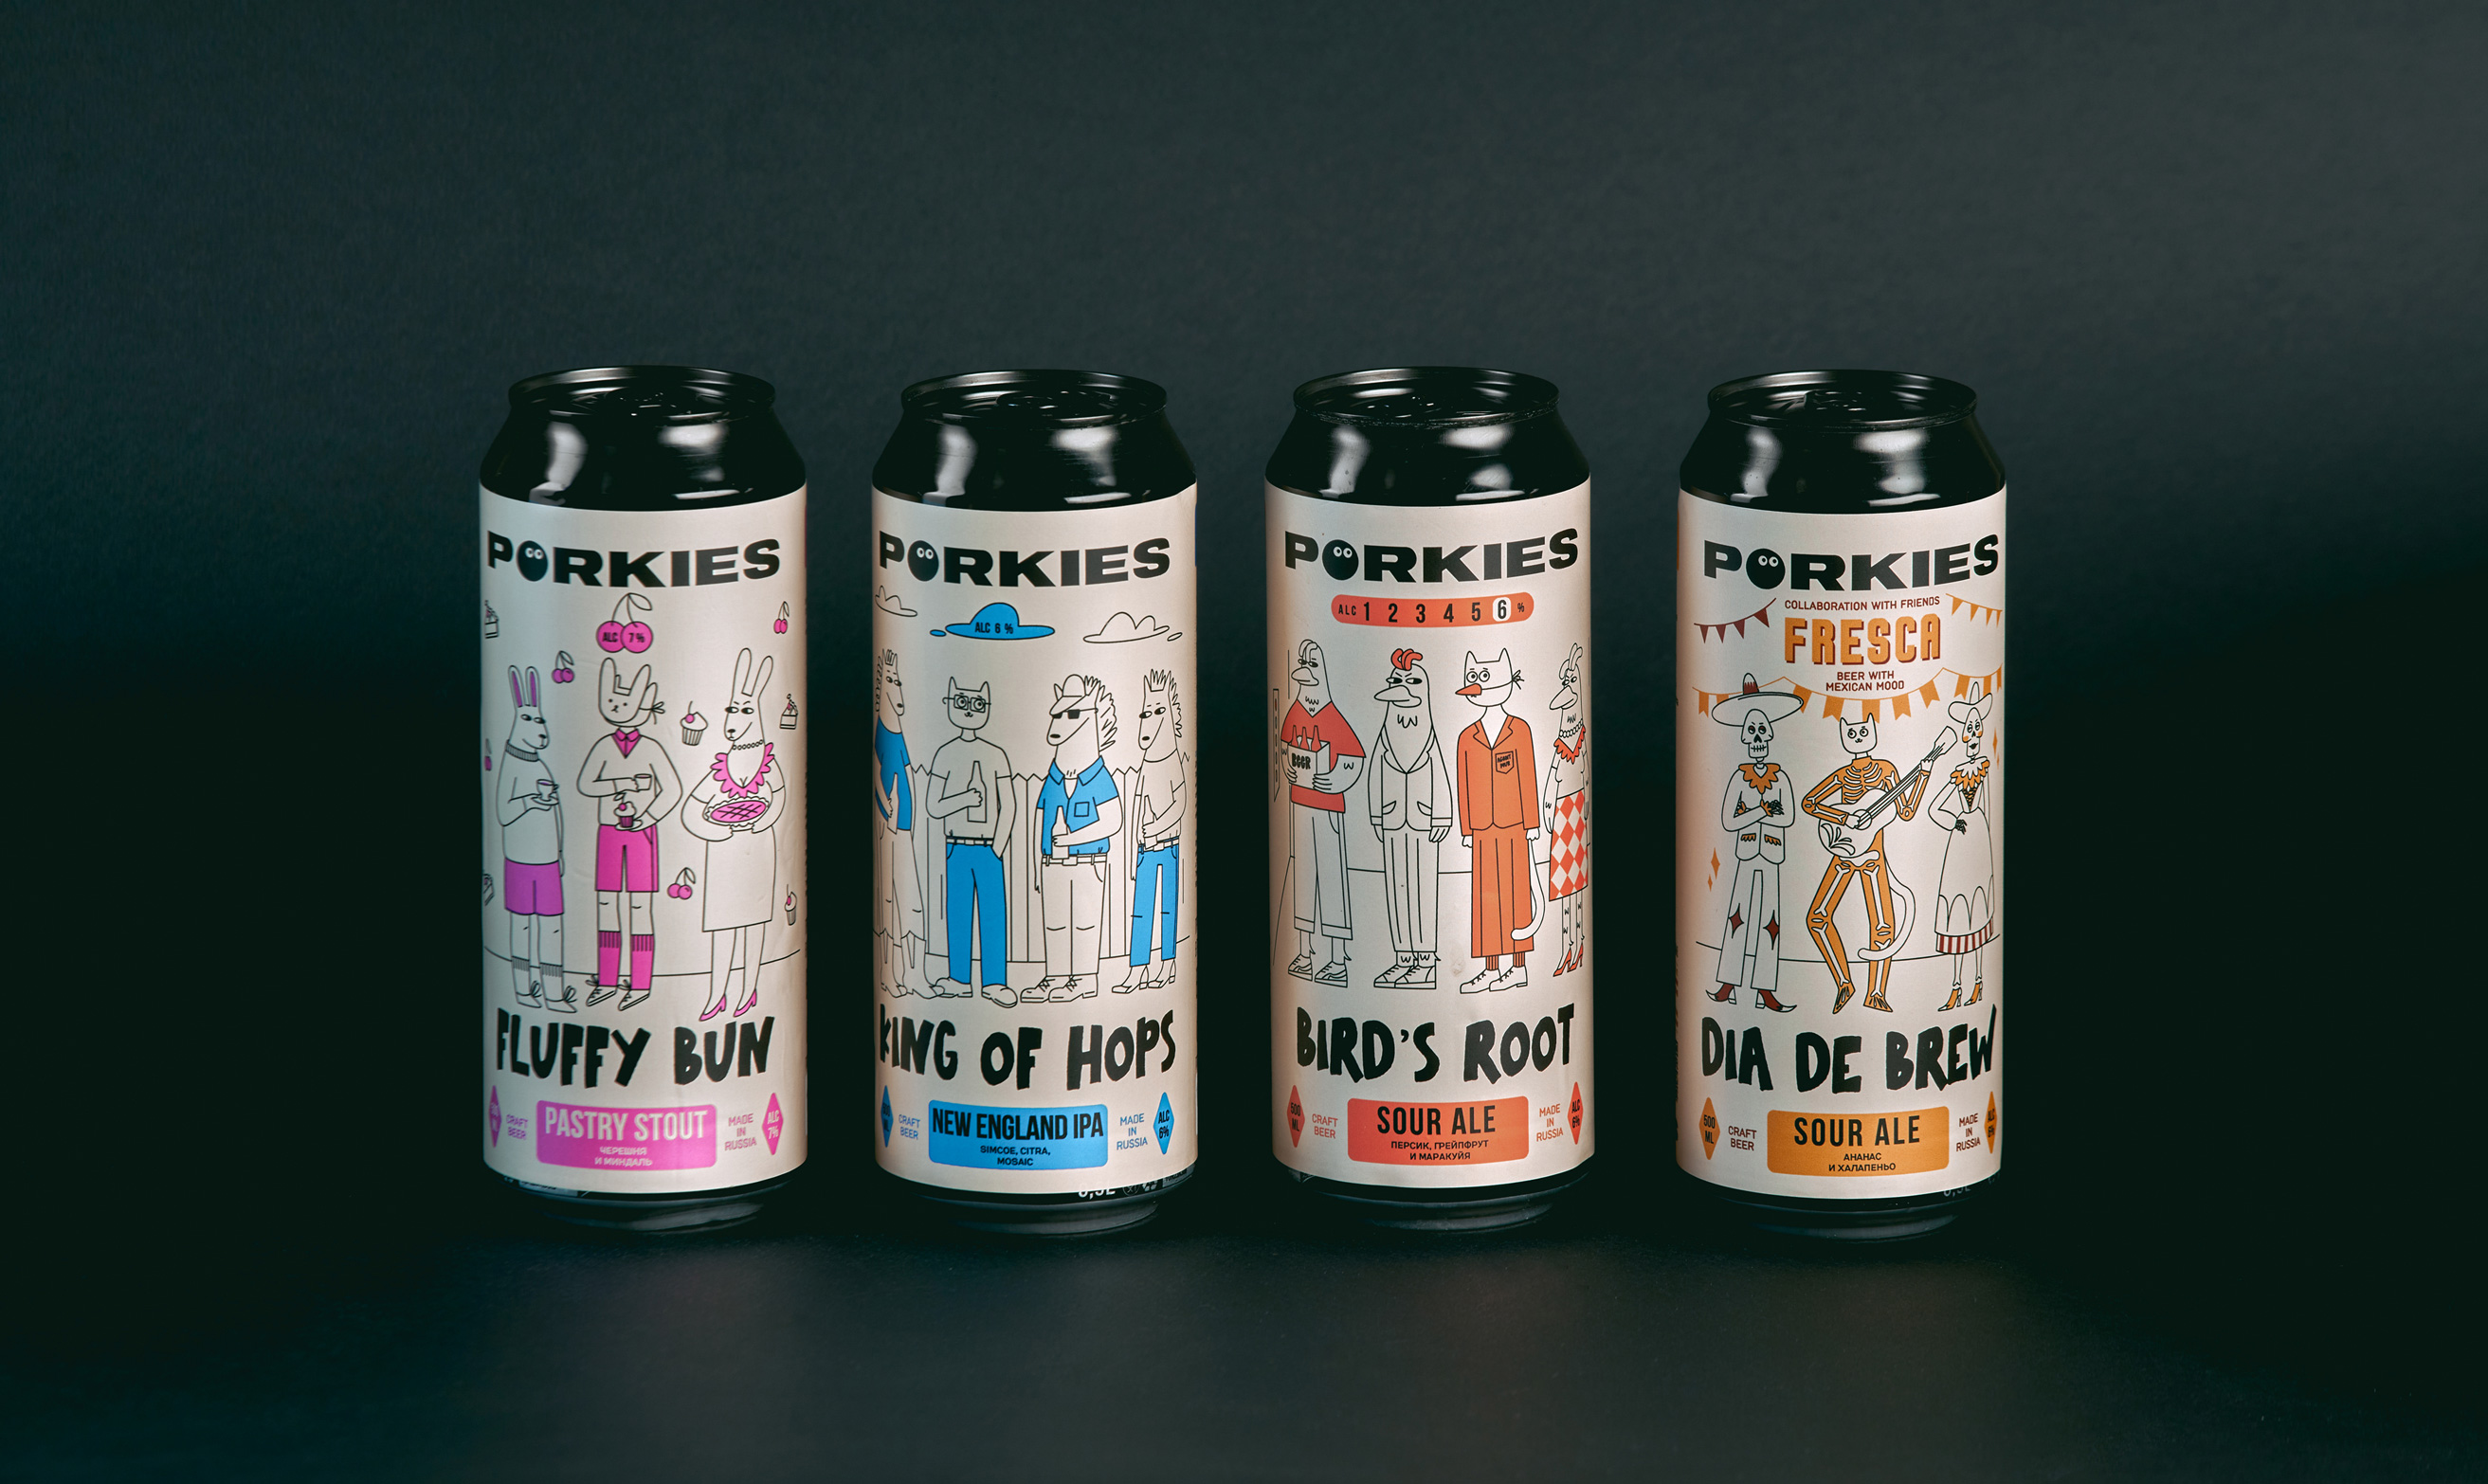 Porkies Craft Beer: A Rebellion in Tyumen’s Brewing Through Brand Identity and Packaging Design Created by Unblvbl Branding Agency